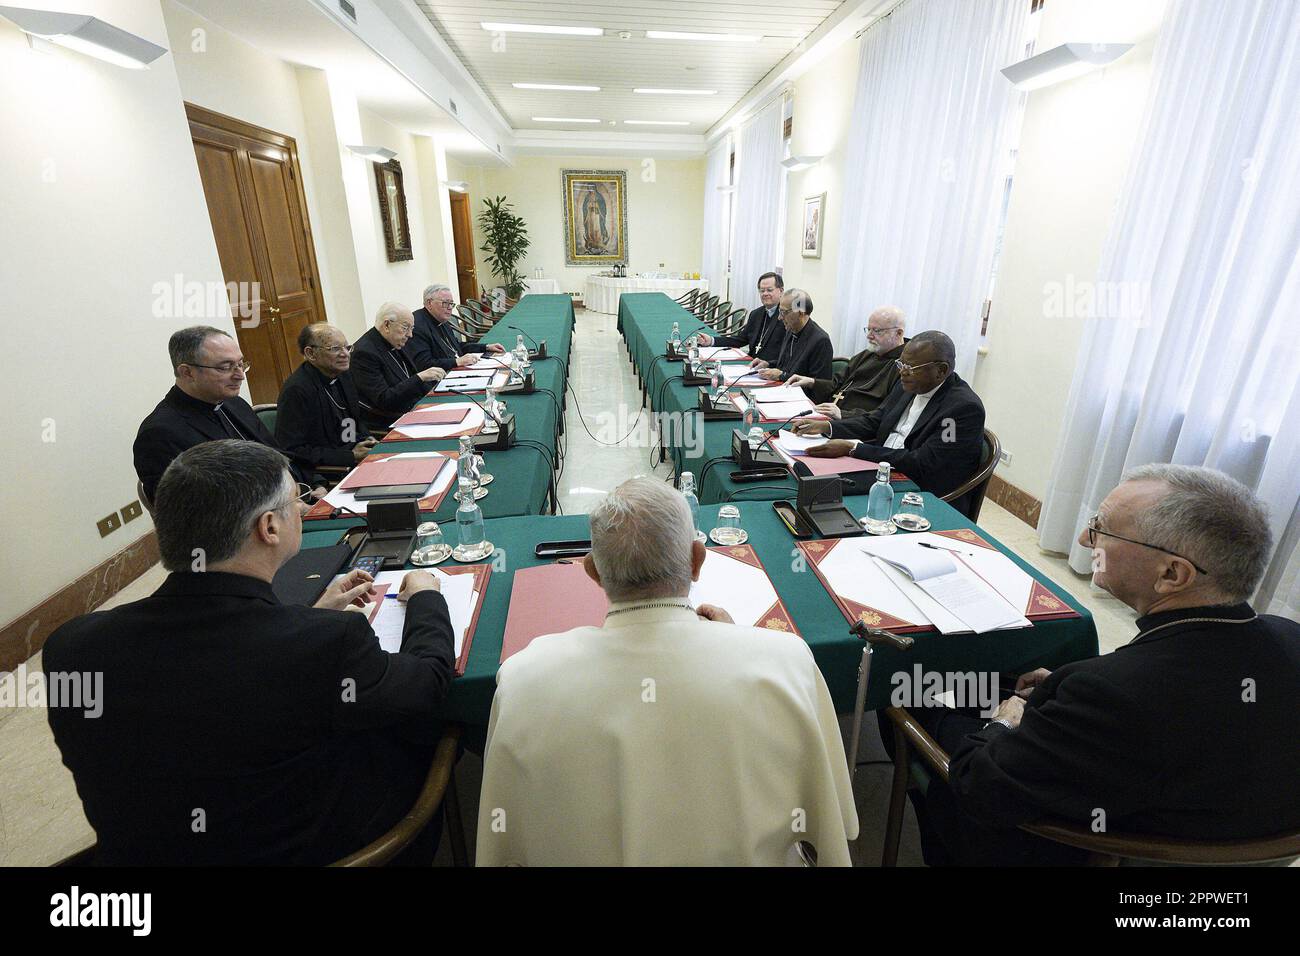 Pope Francis presides over the first meeting of the new Council of Cardinals at the Vatican on April 24, 2023. This is the first meeting of the C9 after its recent renewal by Francis. He created the Council in 2013 to help him with the governance of the Universal Church, and with the reform of the Roman Curia. The members of the new Council are Cardinals Pietro Parolin, Secretary of State; Fernando Vergez Alzaga, President of the Governorate of Vatican City State; Fridolin Ambongo Besungu, Archbishop of Kinshasa; Oswald Gracias, Archbishop of Bombay; Sean Patrick O'Malley, Archbishop of Boston Stock Photo